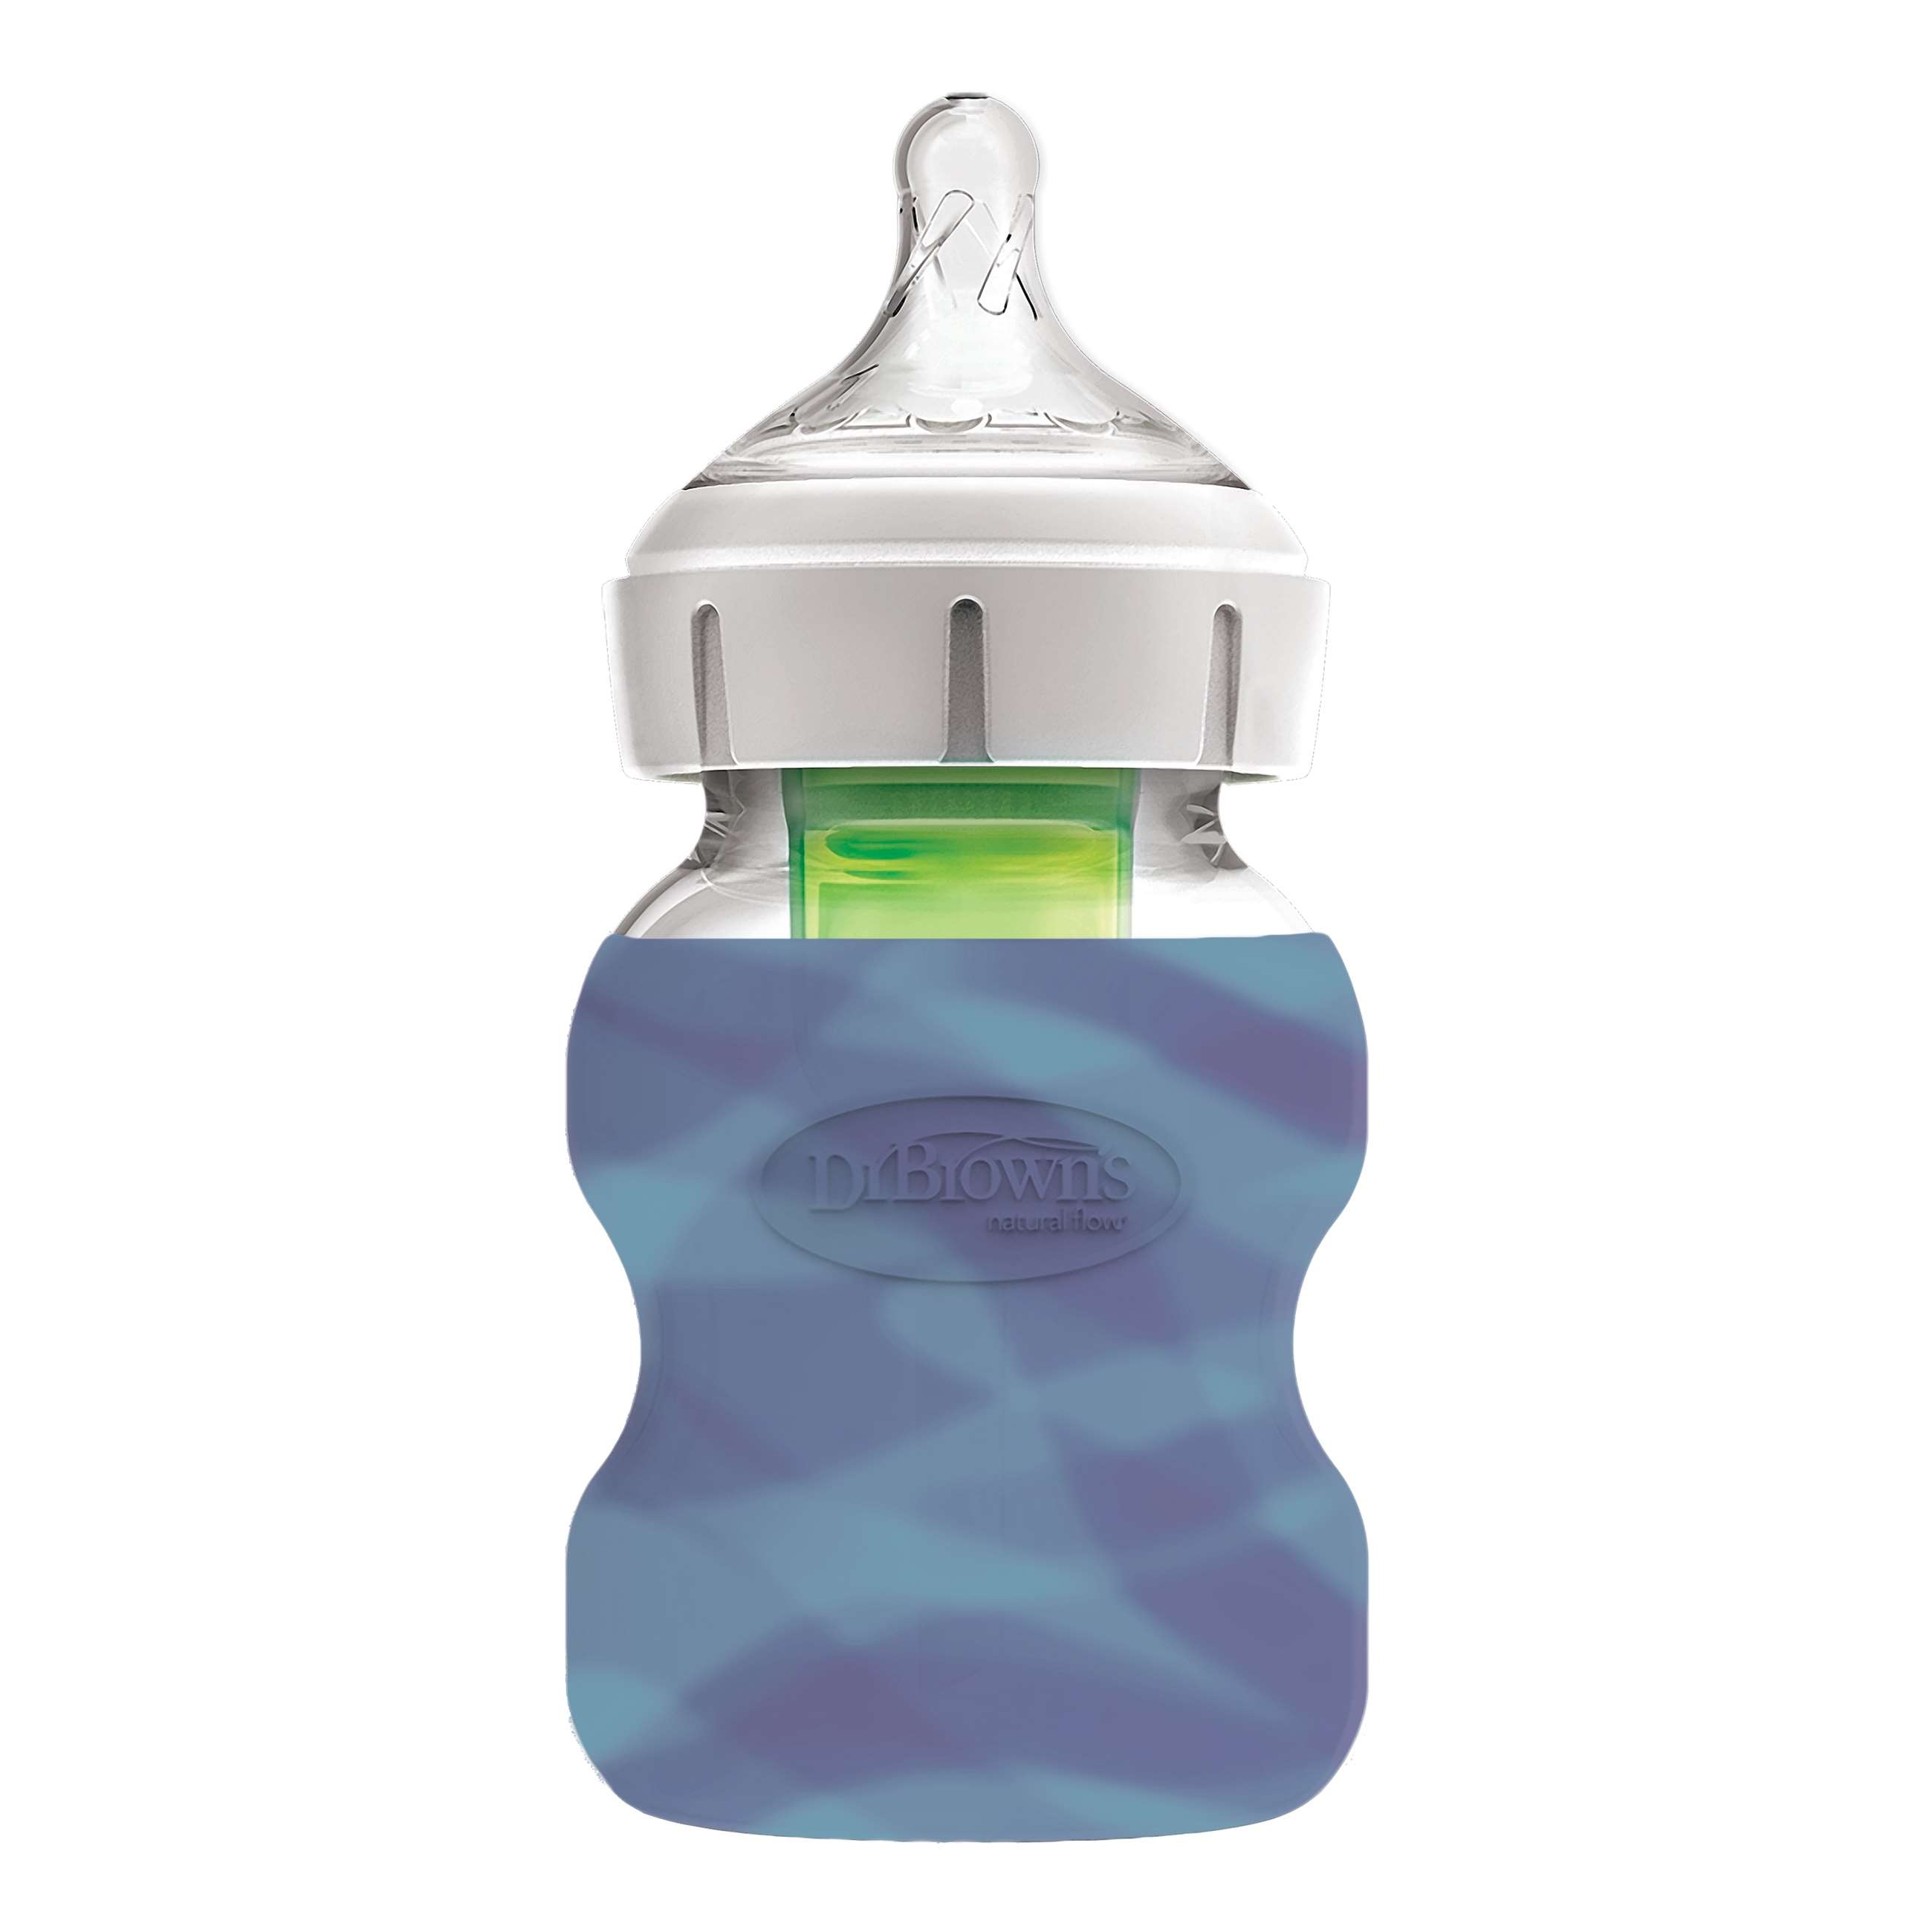 9513 wb51700_ac208_product_options+_wide-neck_glass_bottle_sleeve_5oz_150ml_glow-in-the-dark